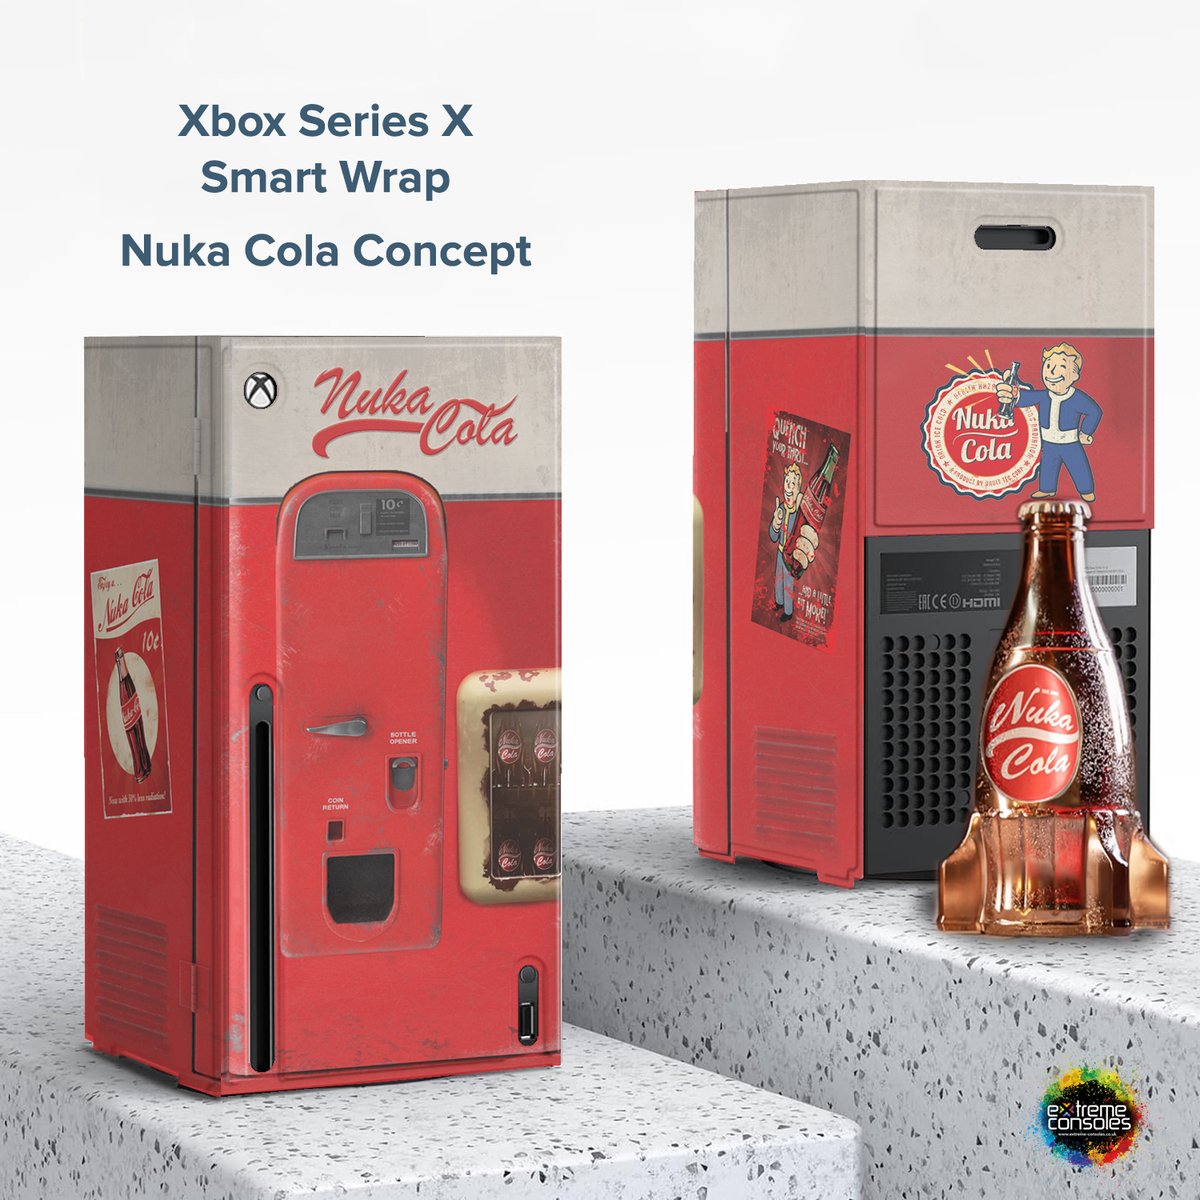 Catching up with the new Fallout series this weekend and enjoying an ice cold Nuka Cola #Fallout #Xbox #gaming